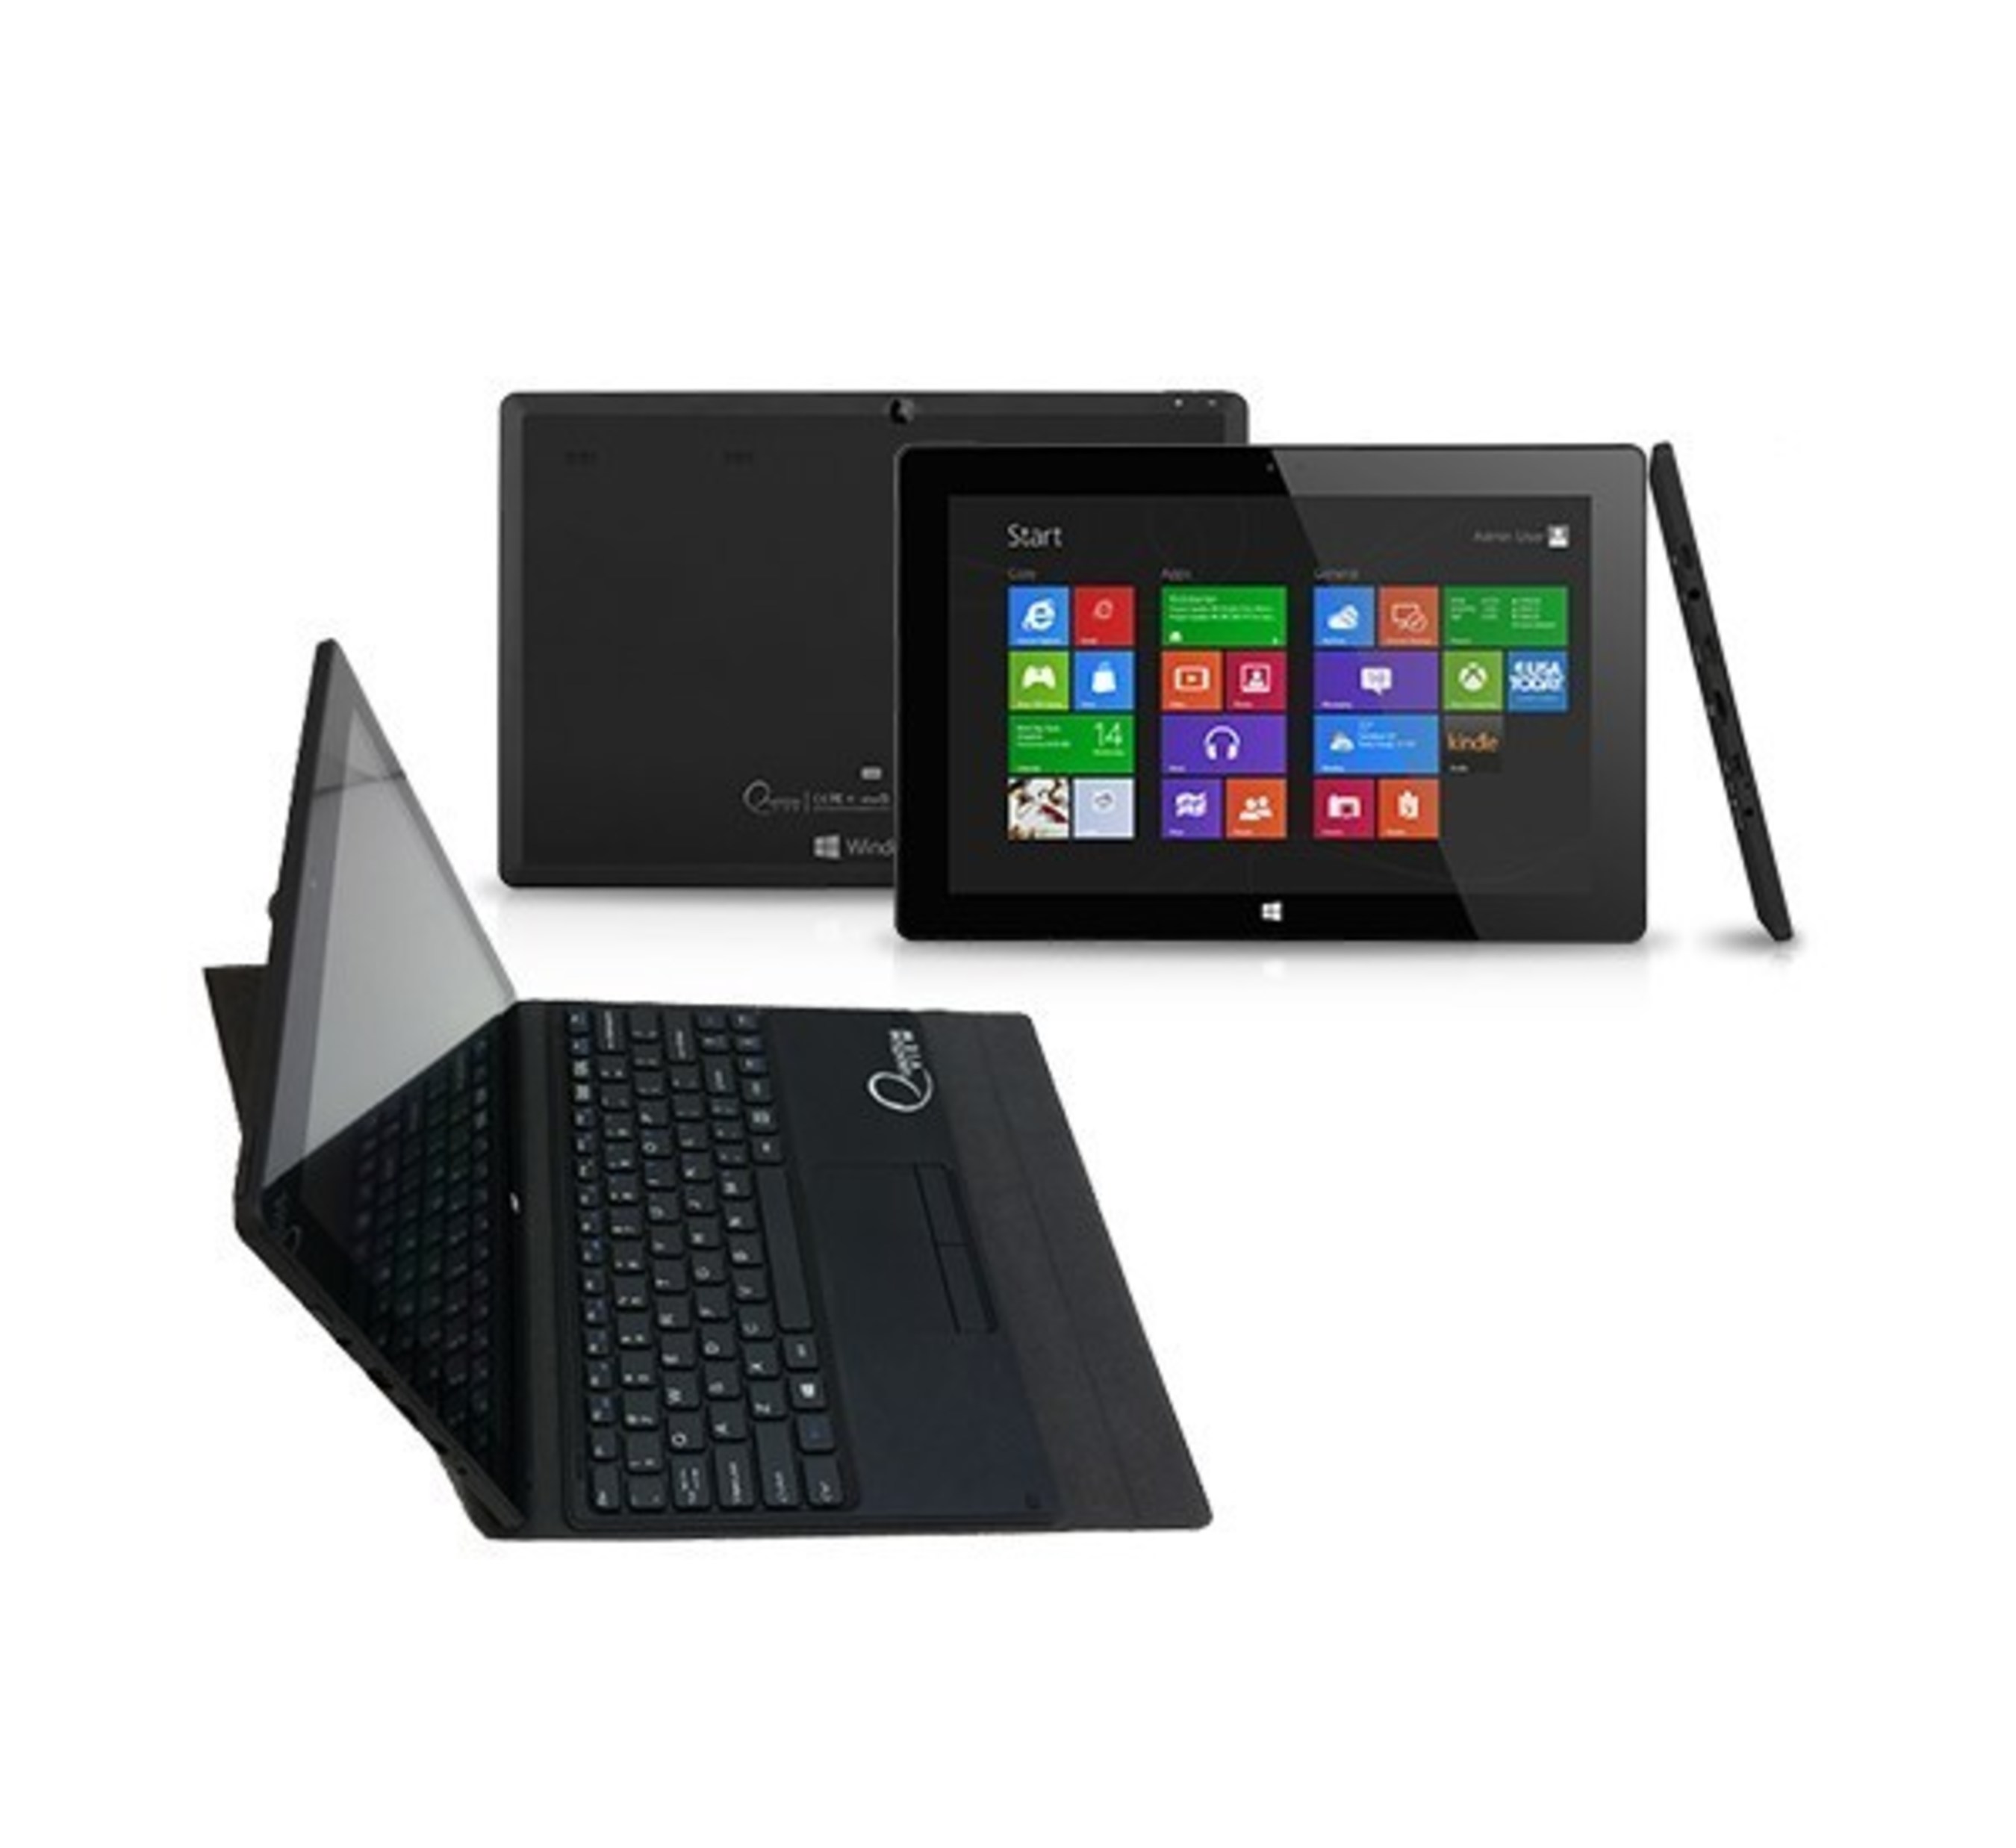 Quantum View Windows Tablet: High quality 10.1" Windows tablet equipped with a free keyboard/case, Microsoft Office 365, and a one year manufacturer warranty.